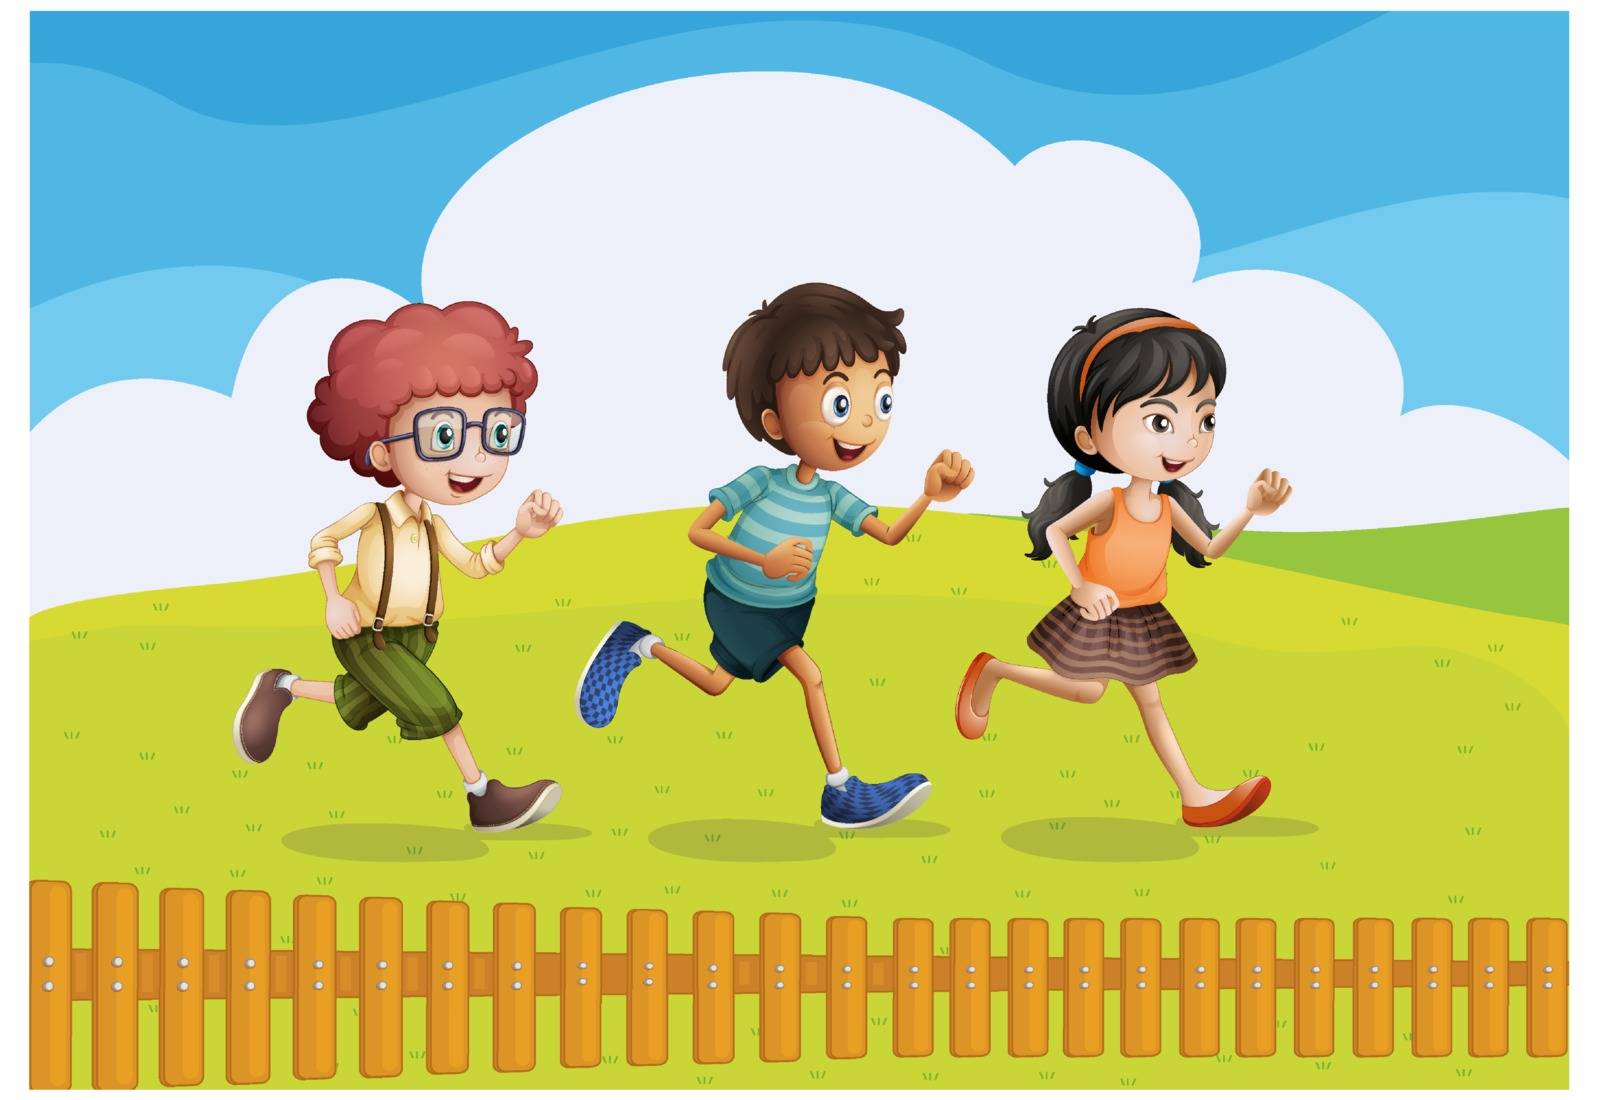 Illustration of kids running in a beautiful nature